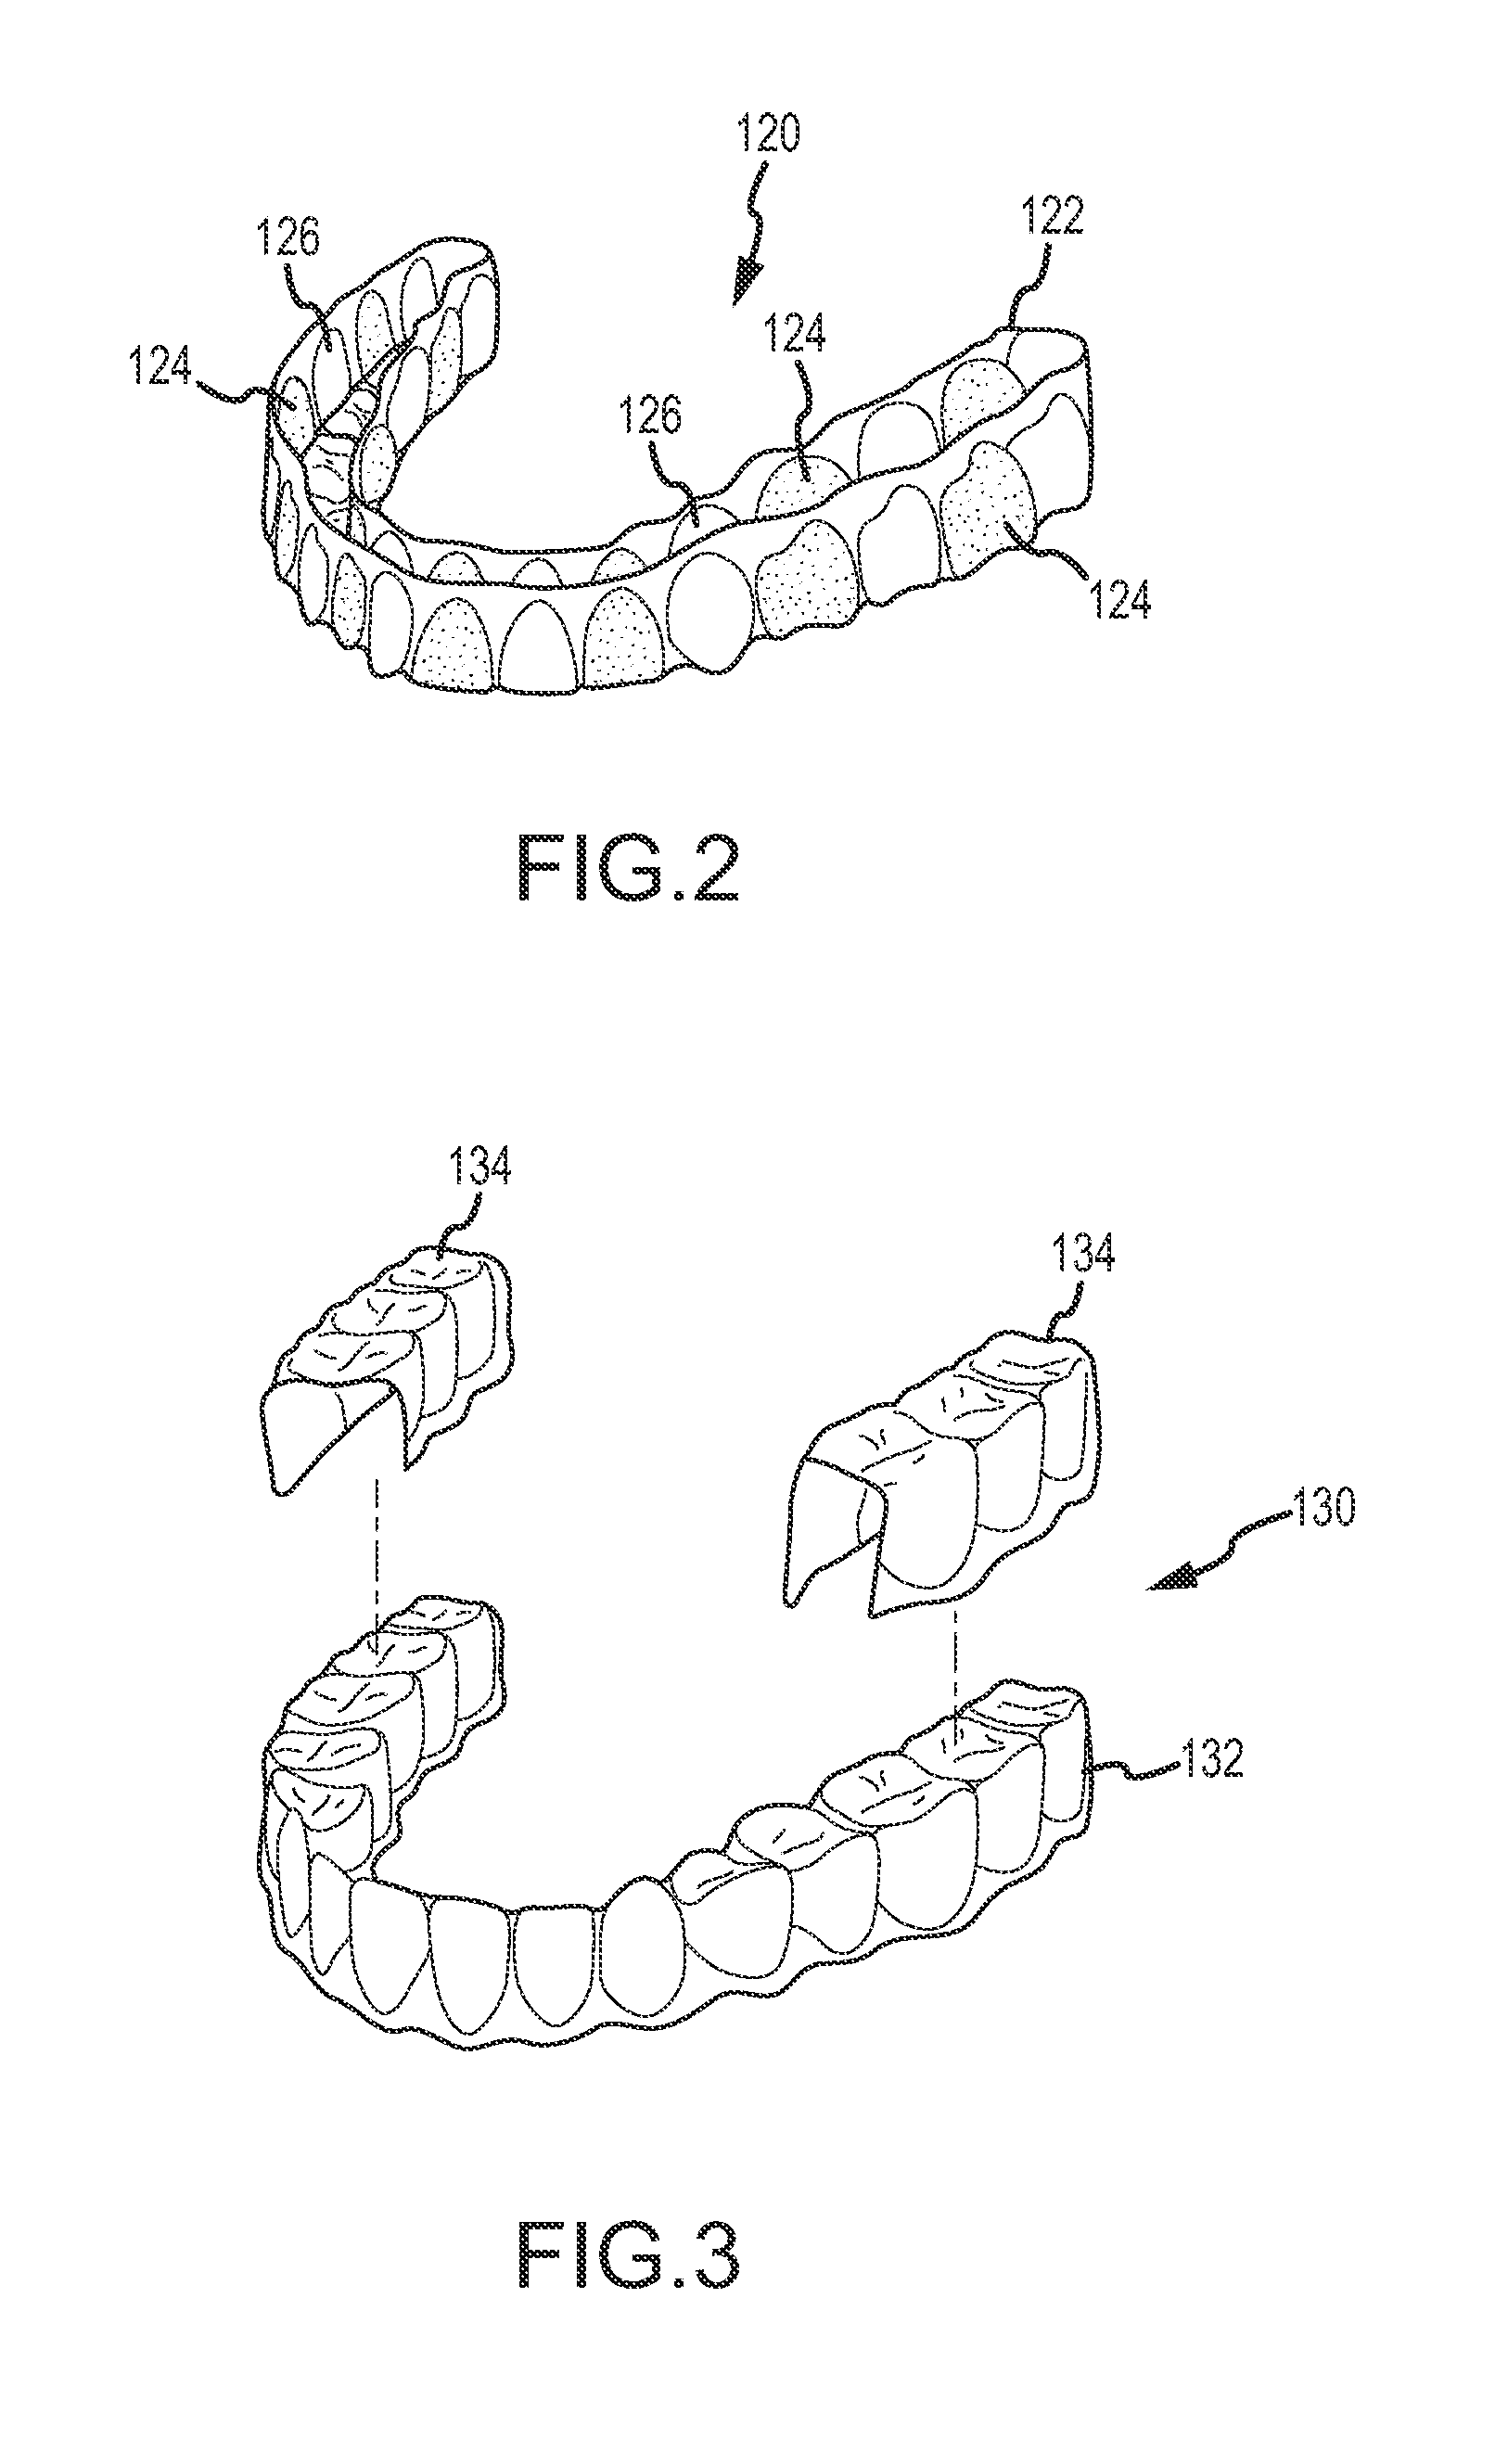 Dental appliance, dental appliance adhesive and related methods and uses